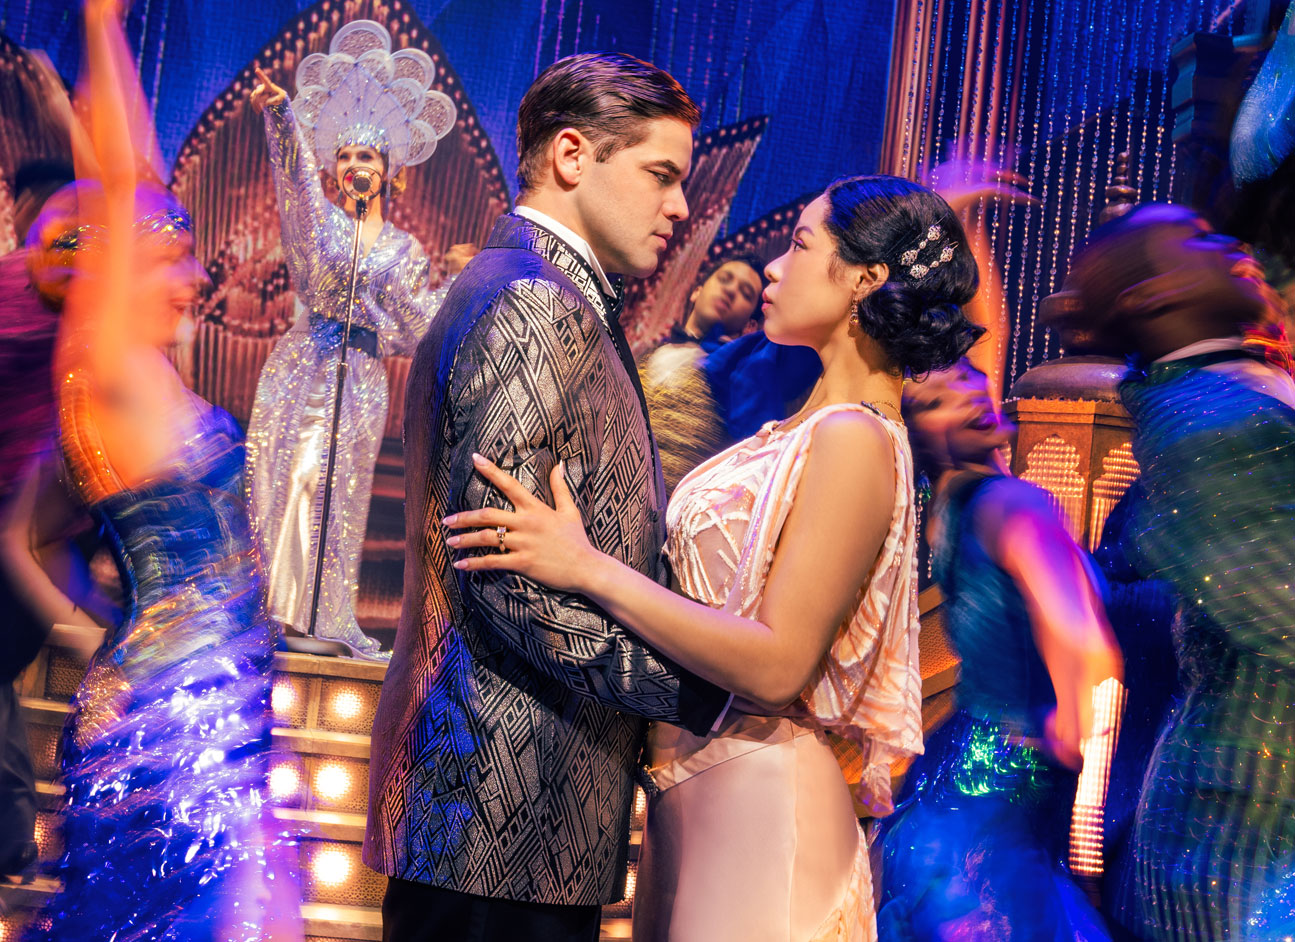 Jeremy Jordan and Eva Noblezada as Jay Gatsby and Daisy Buchanan embrace on a dance floor, at an extravagant party, looking into each other's eyes very seriously